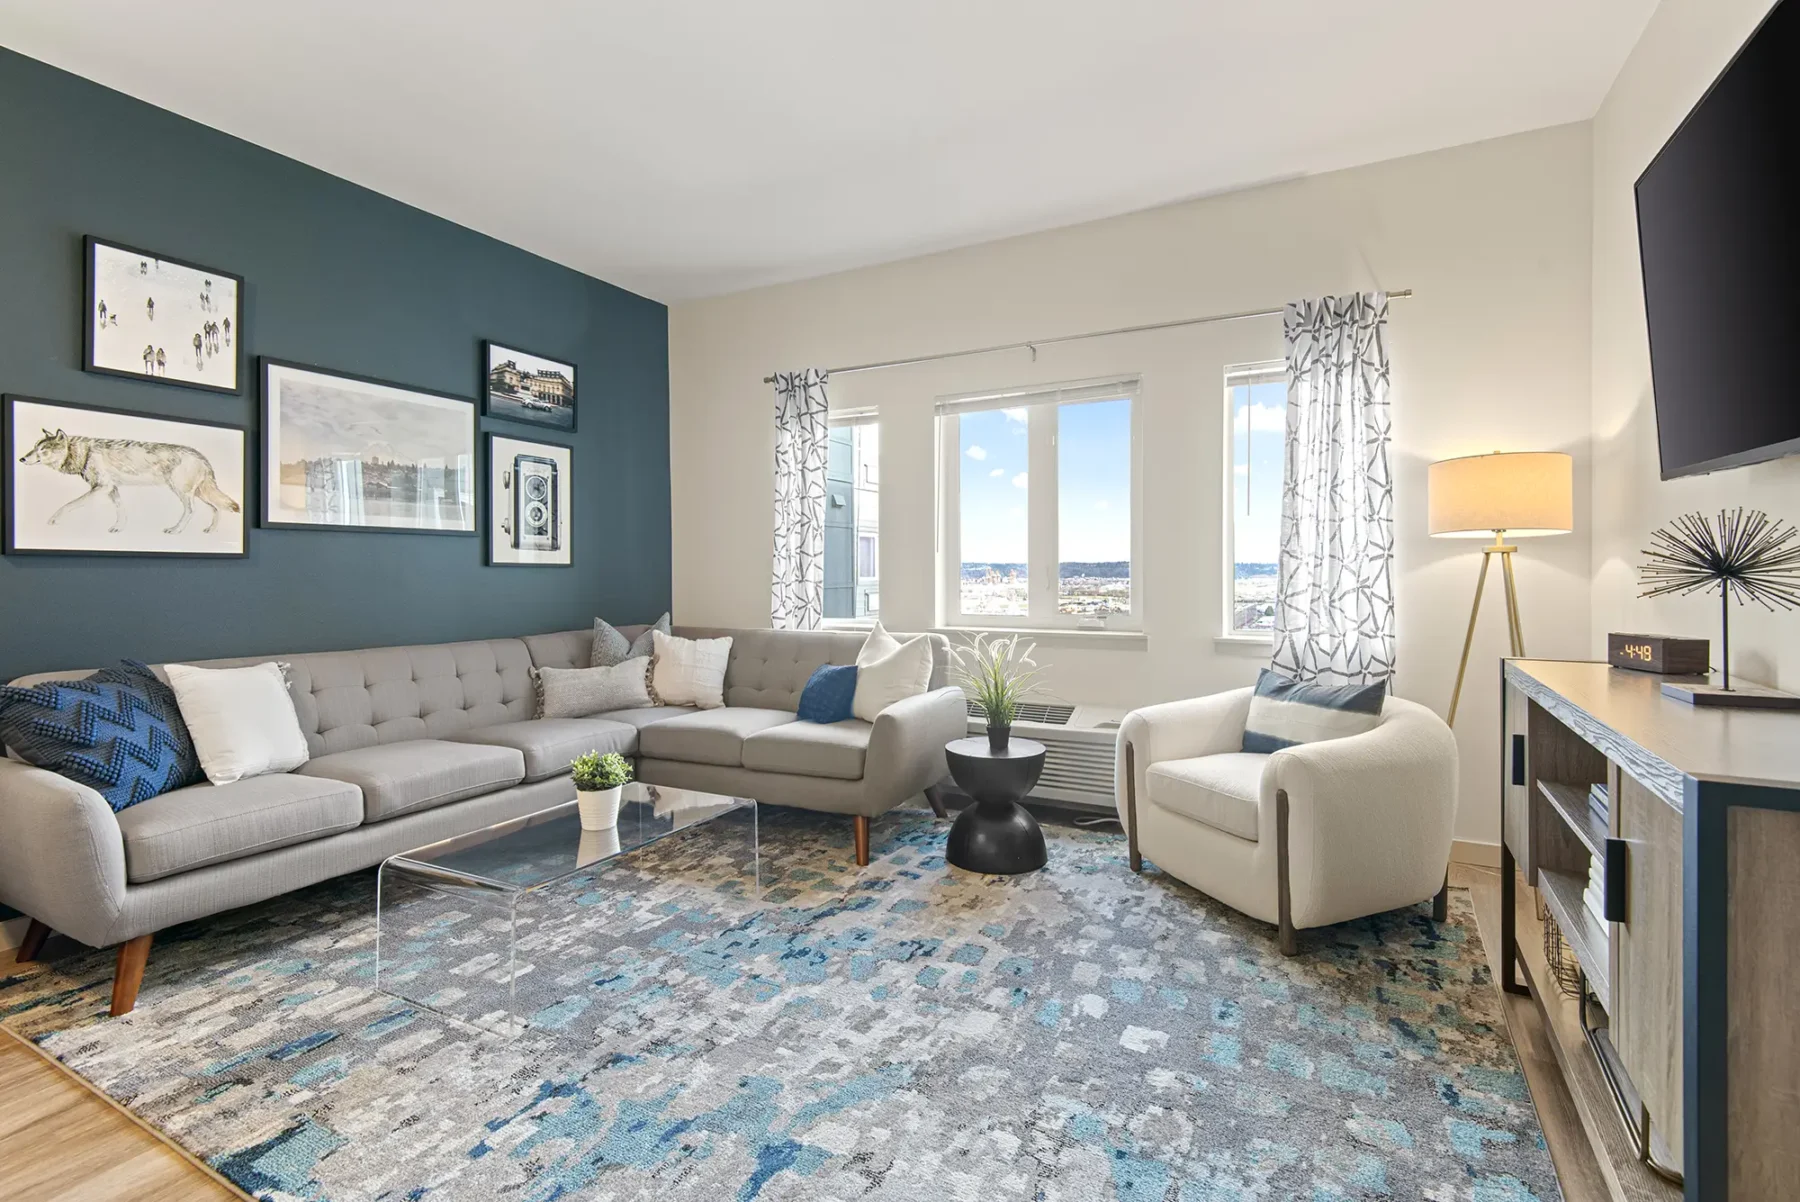 Staged living room with blue accent wall and large windows